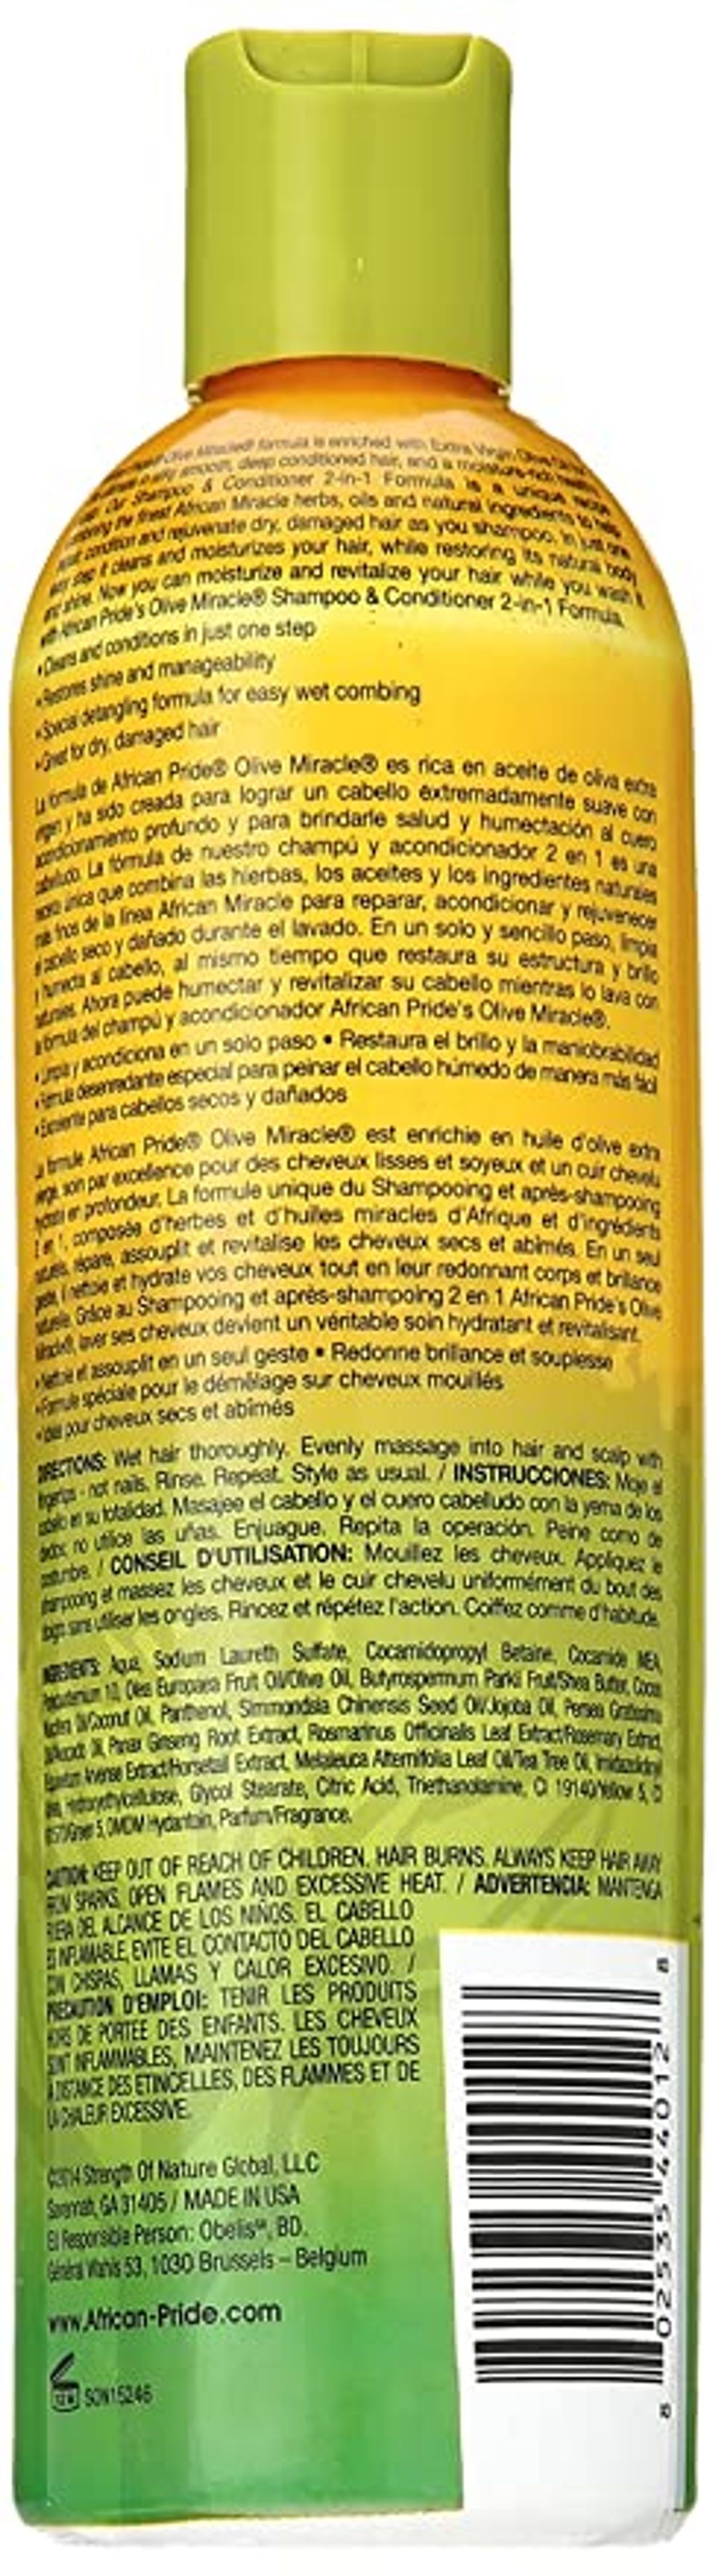 African Pride Olive Miracle 2 in 1 Shampoo & Conditioner - 355ml